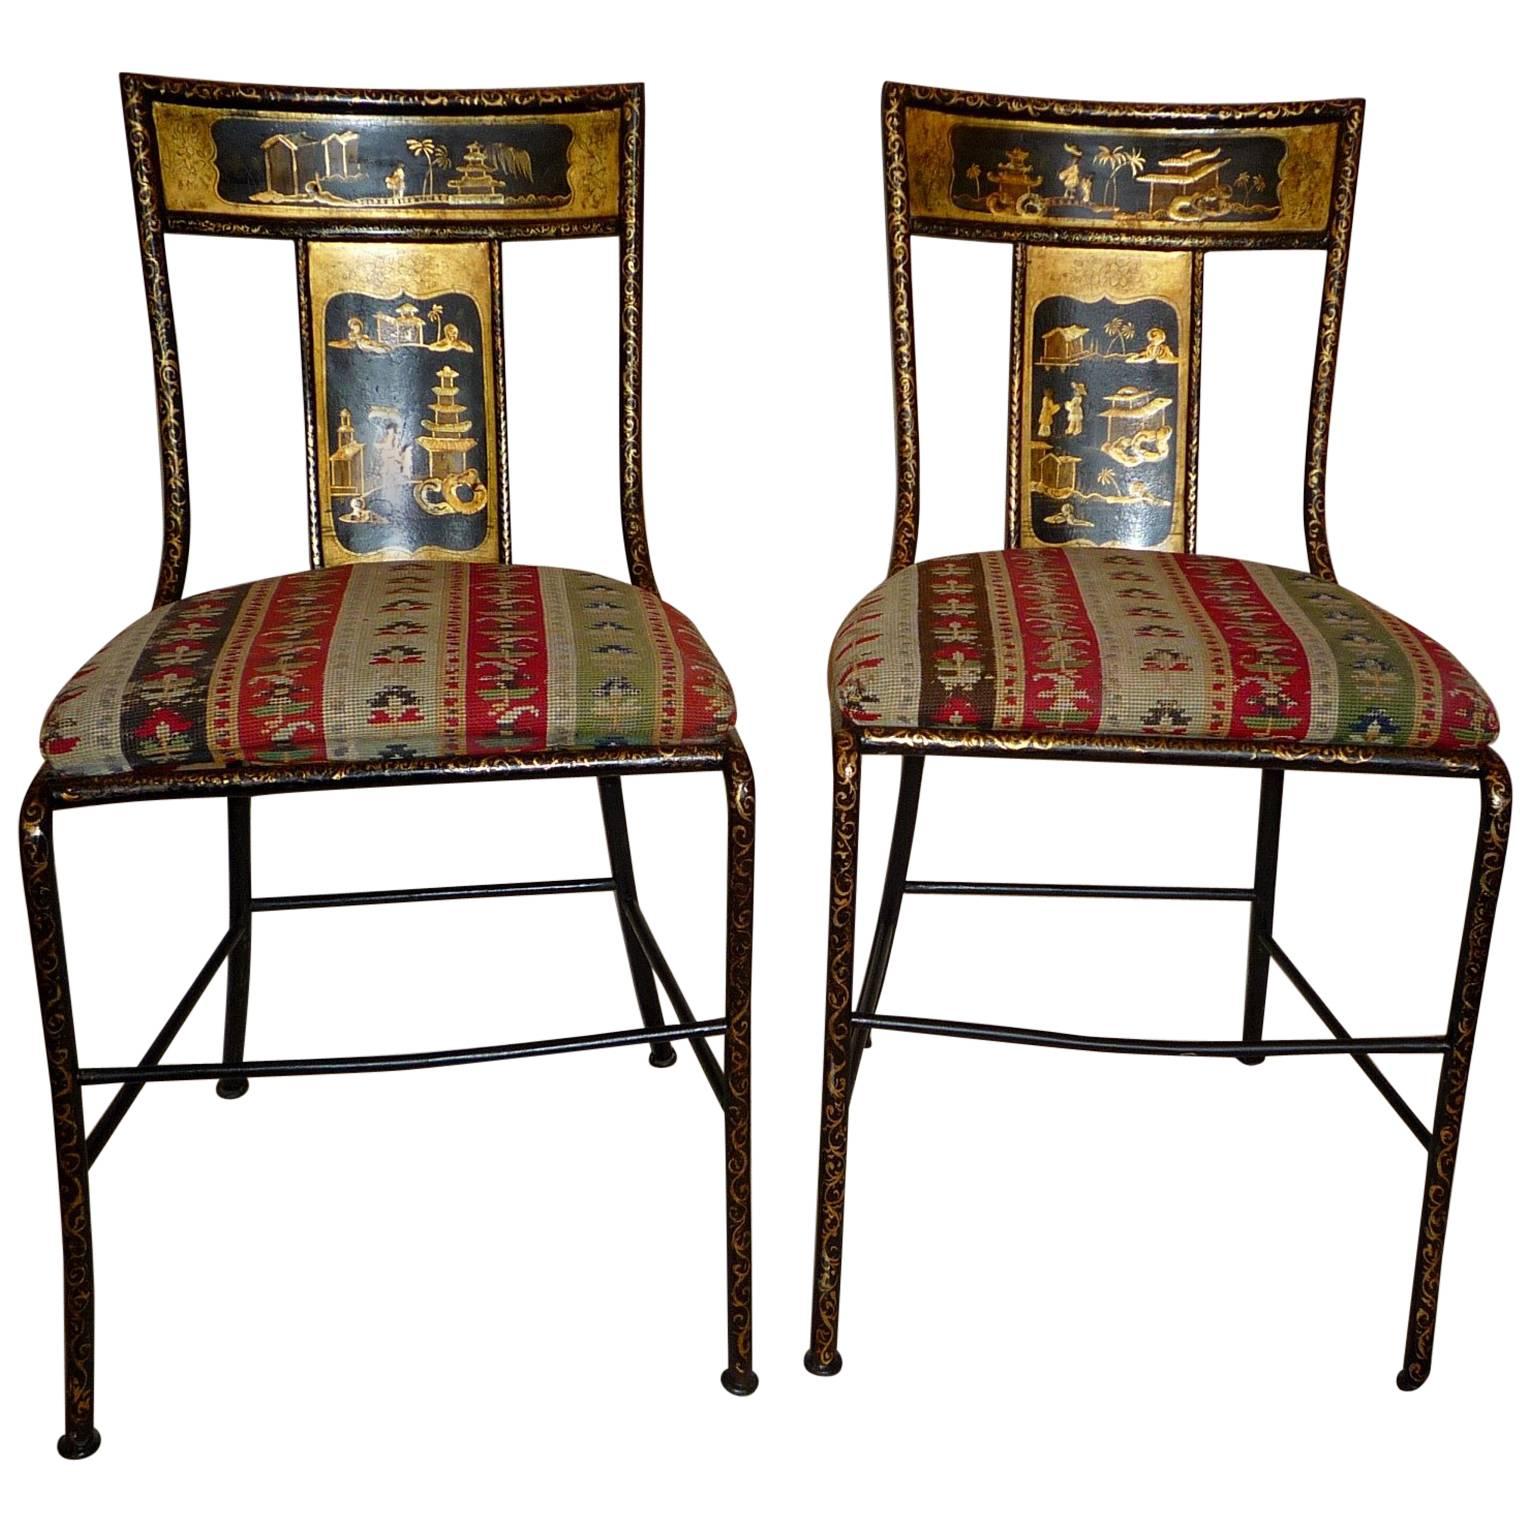 Pair of Victorian Painted Iron Chairs, Chinoiserie Decoration, Prov. M. Castaing